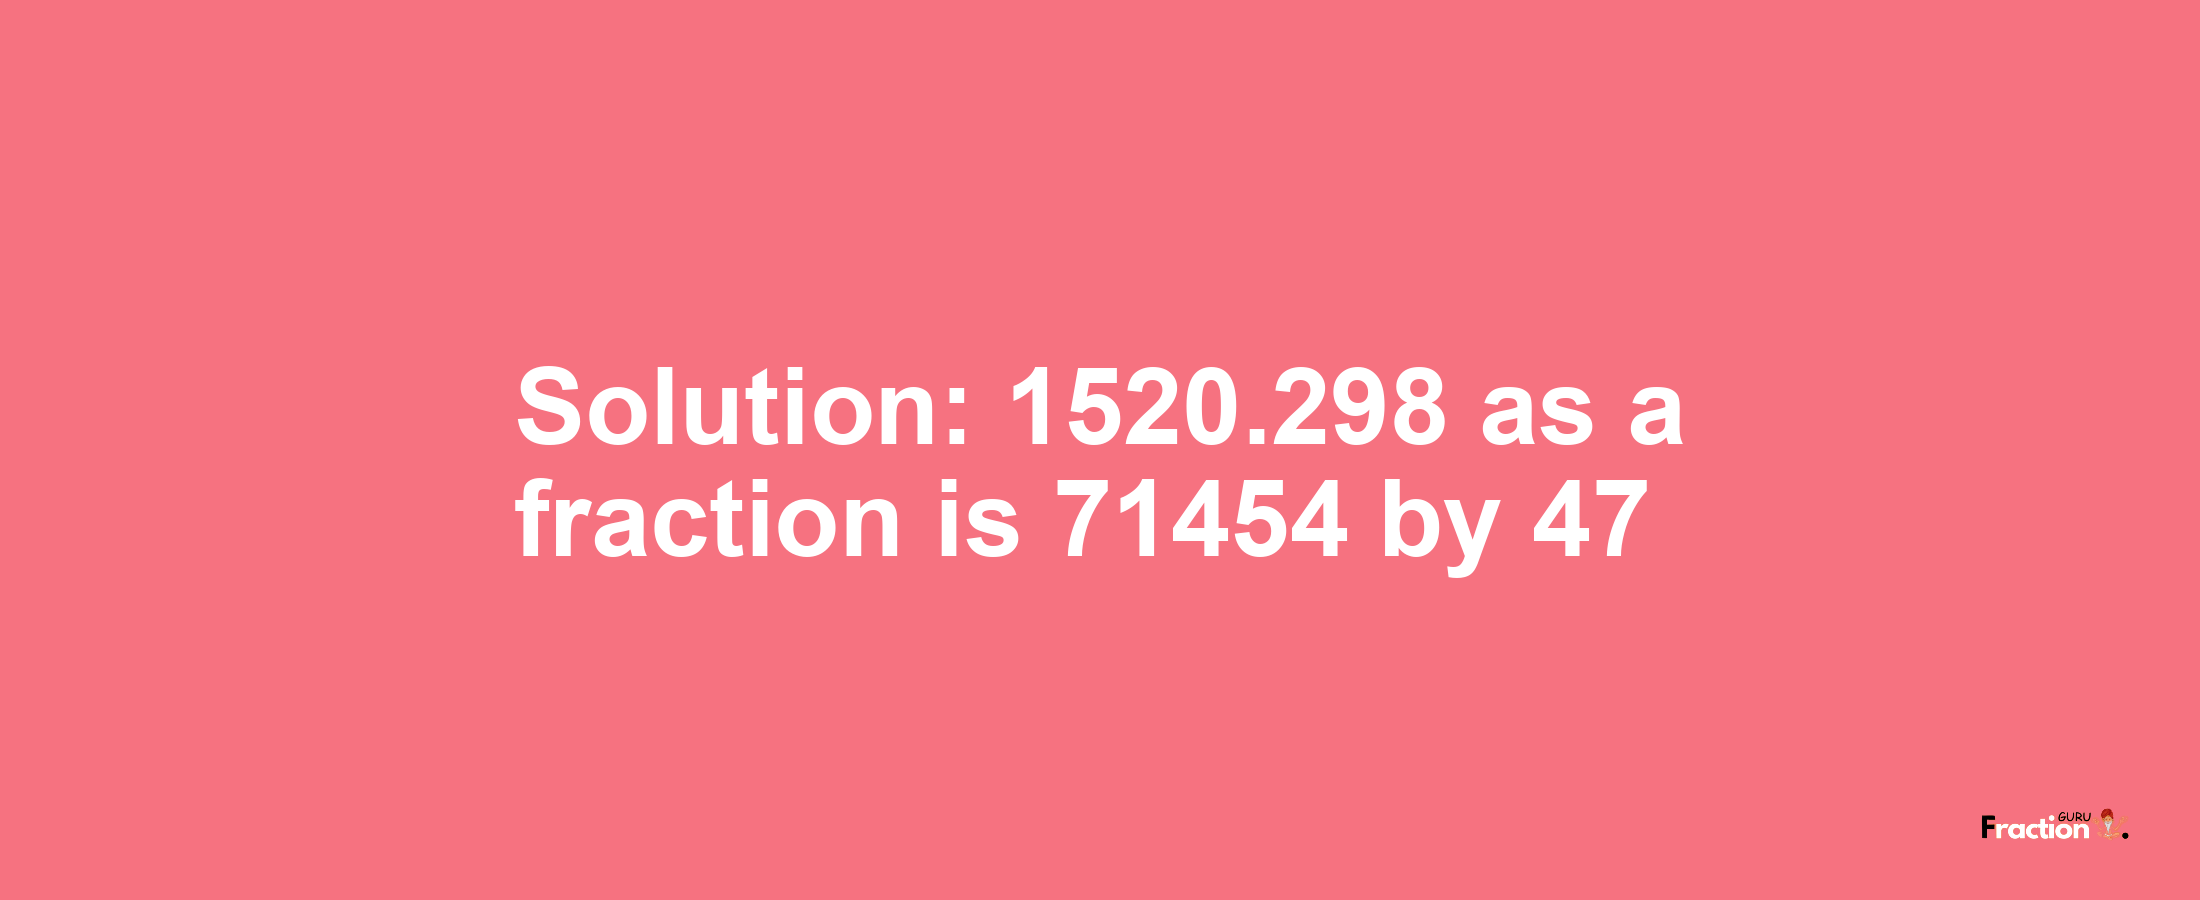 Solution:1520.298 as a fraction is 71454/47